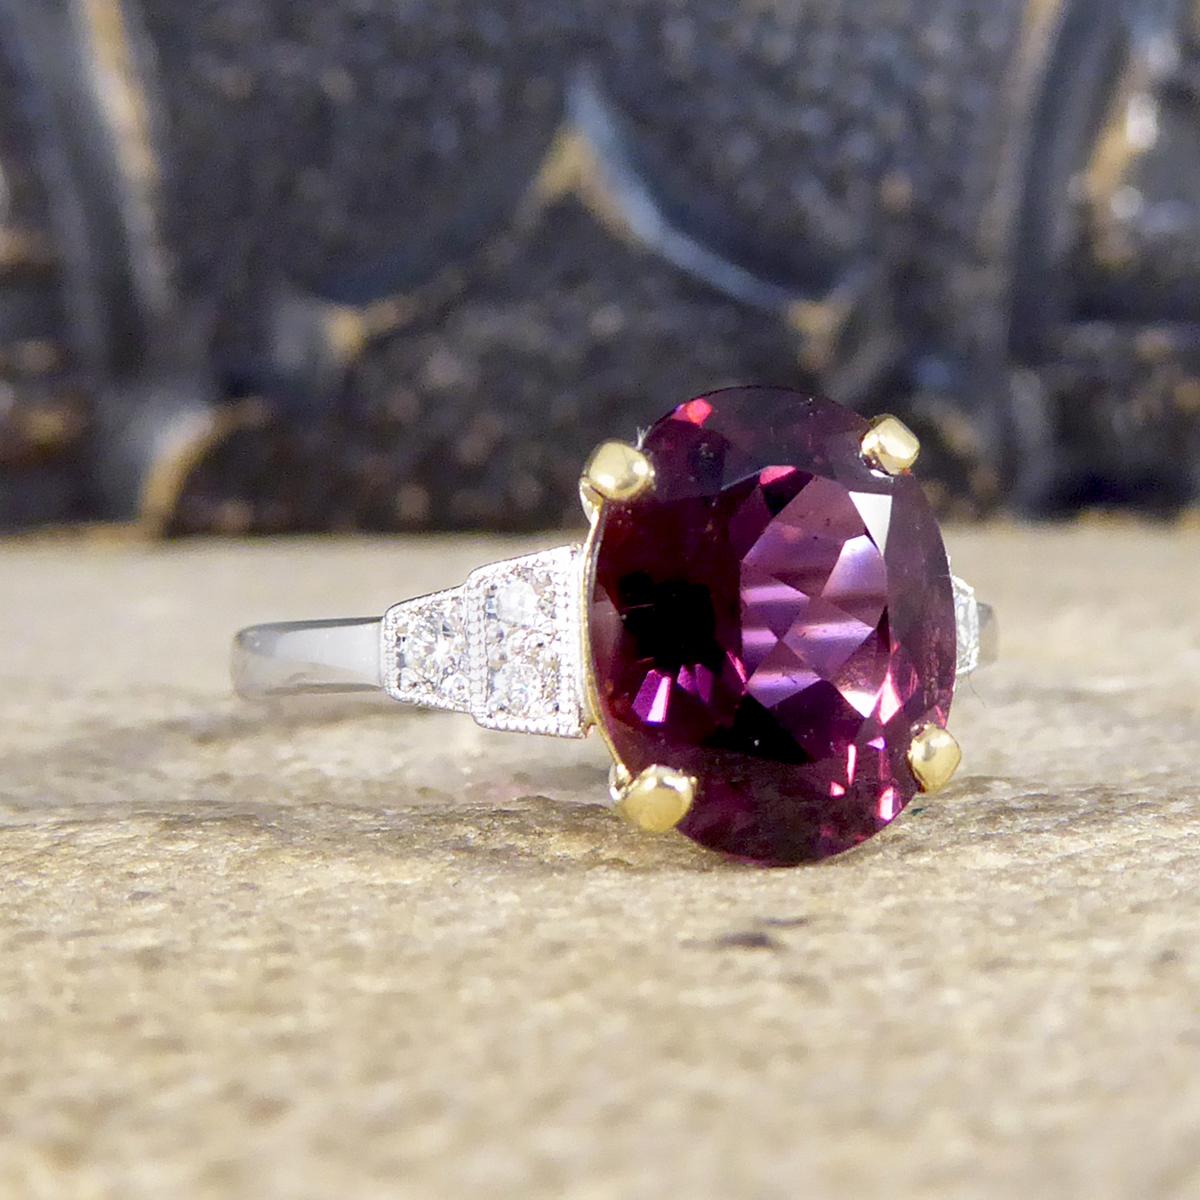 This stunning ring has been hand crafted and is new and never worn. It has been designed and carefully crafted to resemble an Art Deco style ring with mesmerising raspberry Red Tourmaline gemstone in the centre weighing 2.77ct set in 18ct Yellow